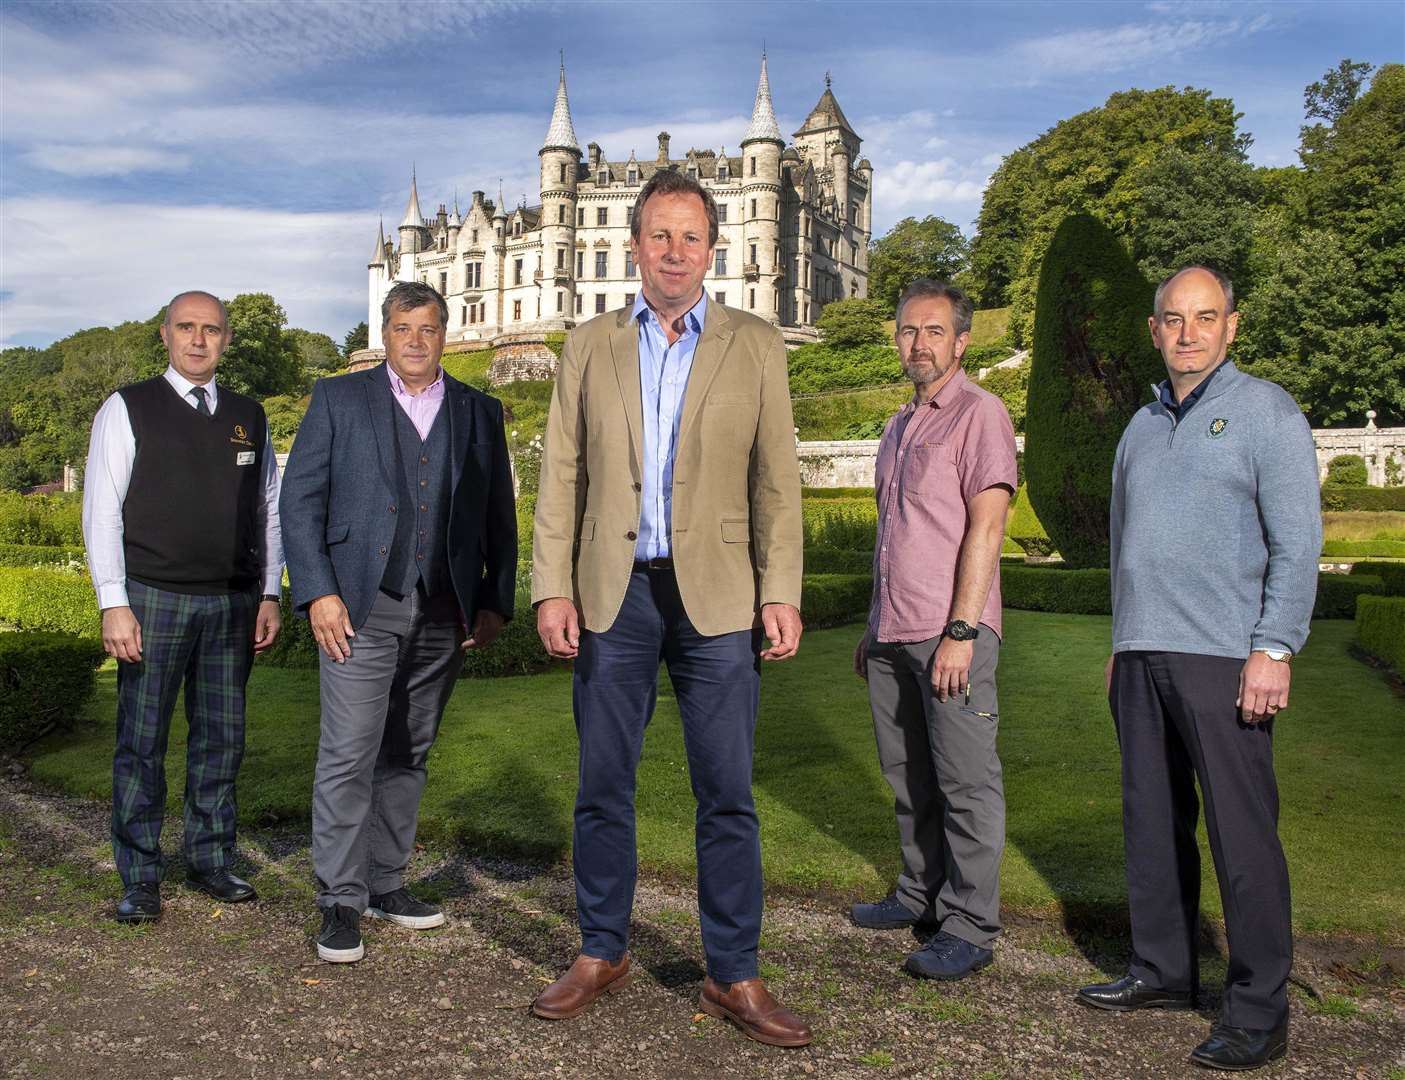 Highland business leaders at Dunrobin Castle after setting out the case for a North Highland Growth Fund – (from left) Scott Morrison, Dunrobin Castle; John Murray, Highland Food & Drink Club; David Whiteford, North Highland Initiative; Ian Sutherland, Go Golspie!; and Neil Hampton, Royal Dornoch Golf Club. Picture: Trevor Martin